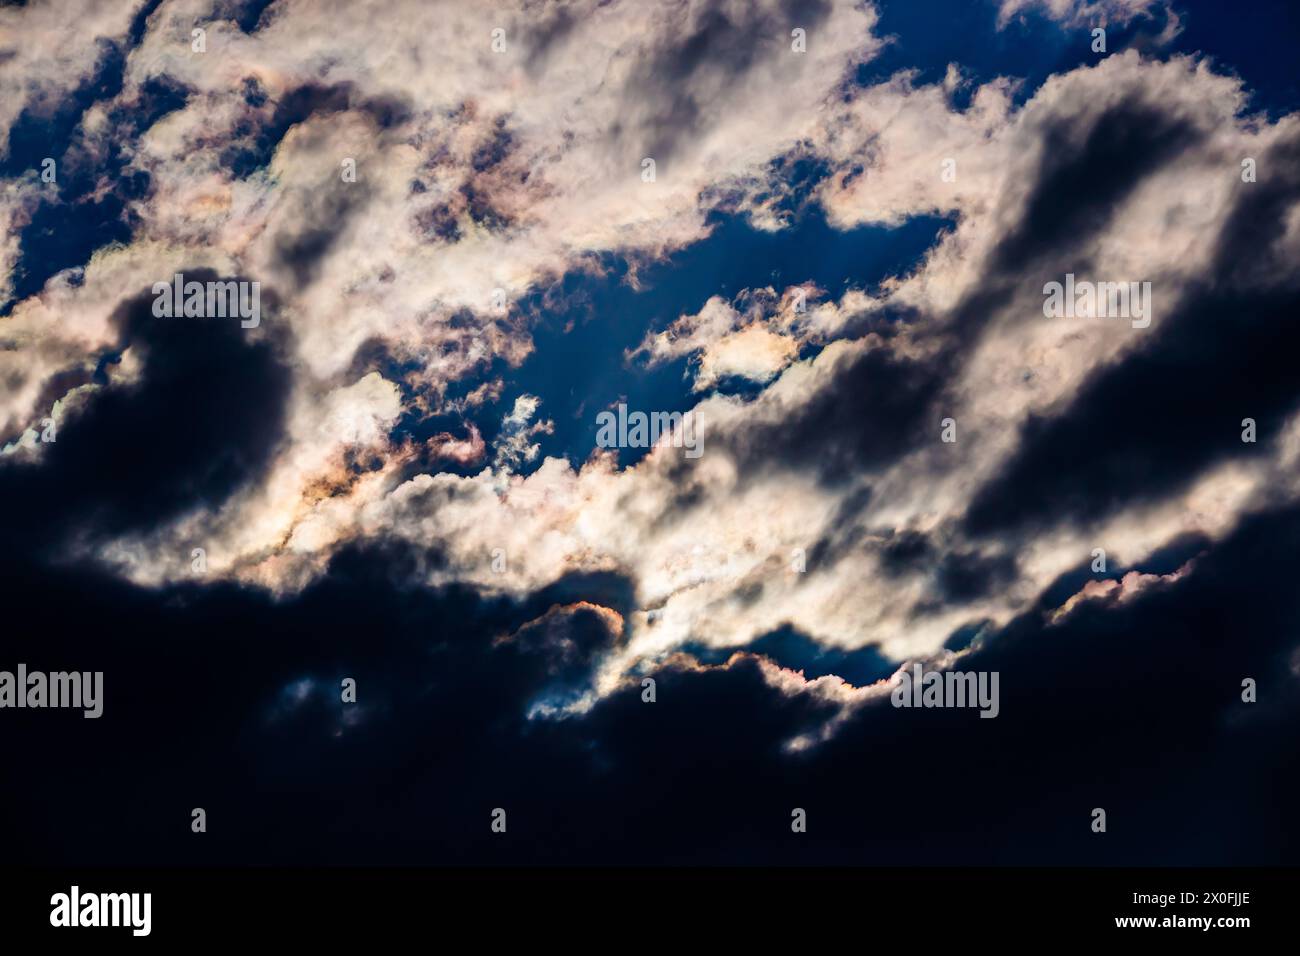 Iridescent clouds in Alhambra, Ciudad Real, Spain. Stock Photo